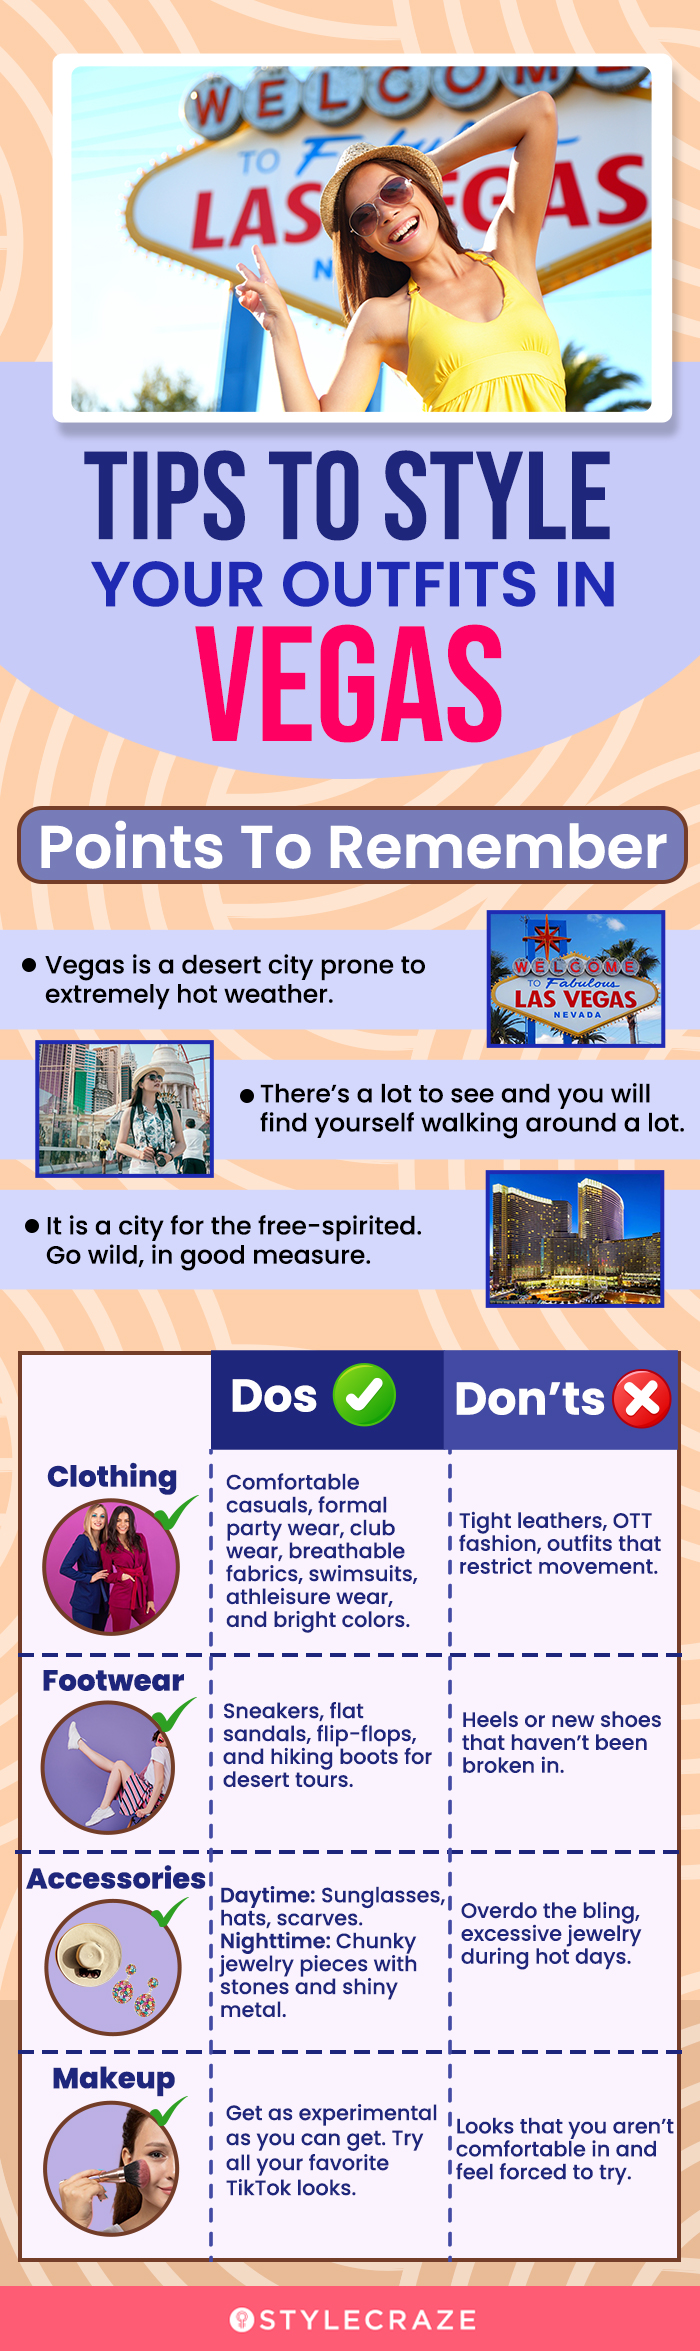 tips to style your outfits in vegas (infographic)